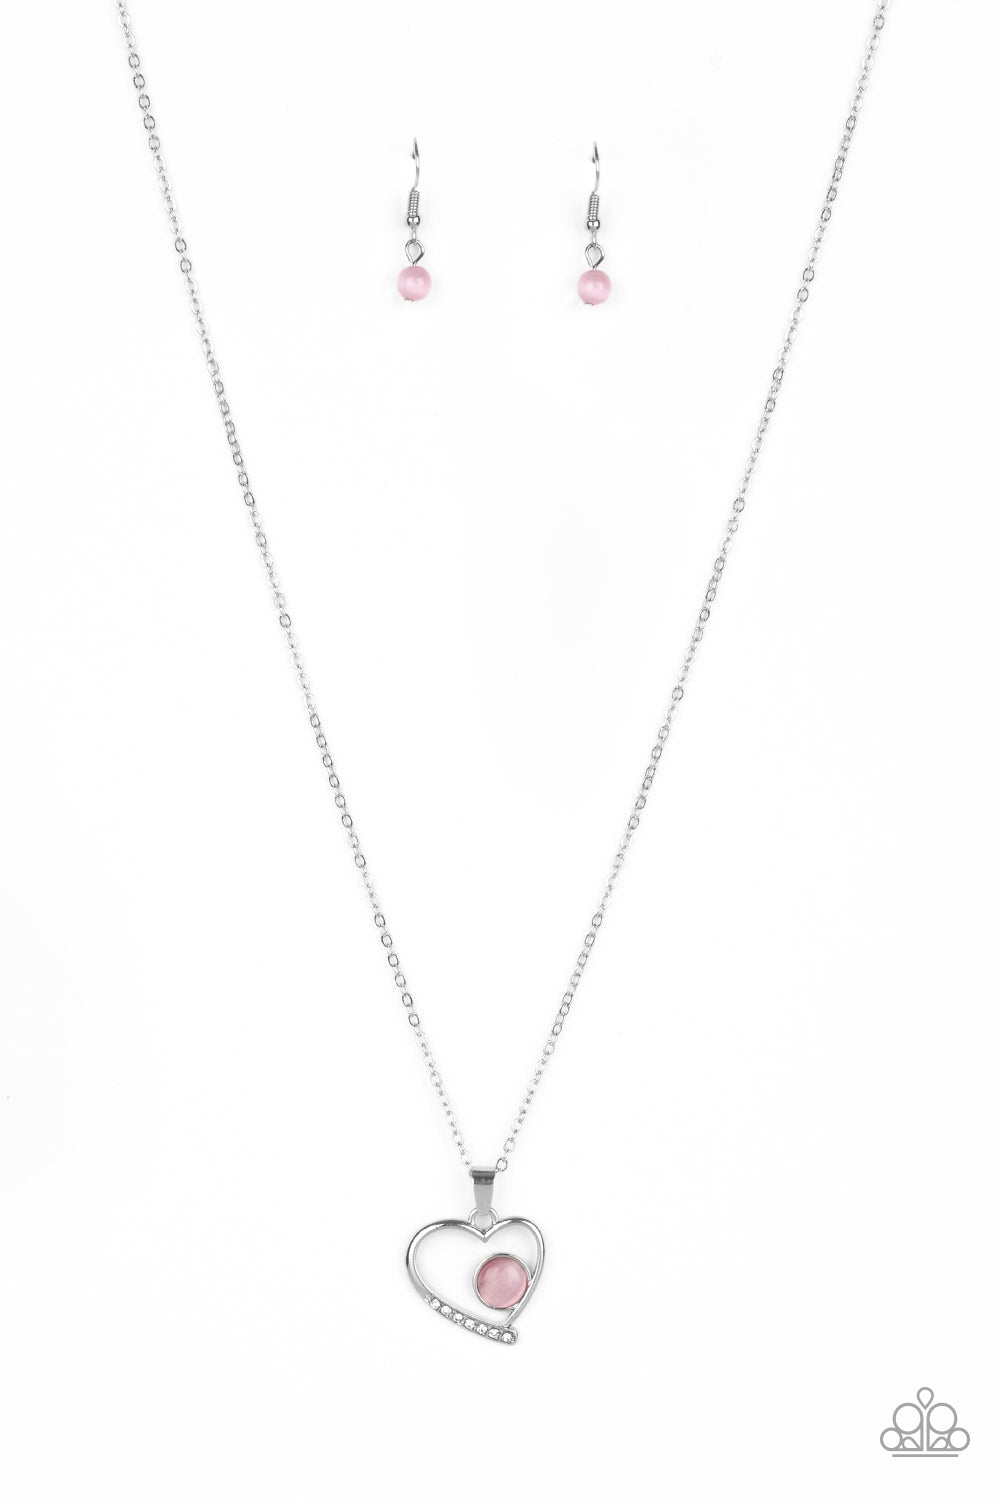 Heart Full of Love Necklace__Pink